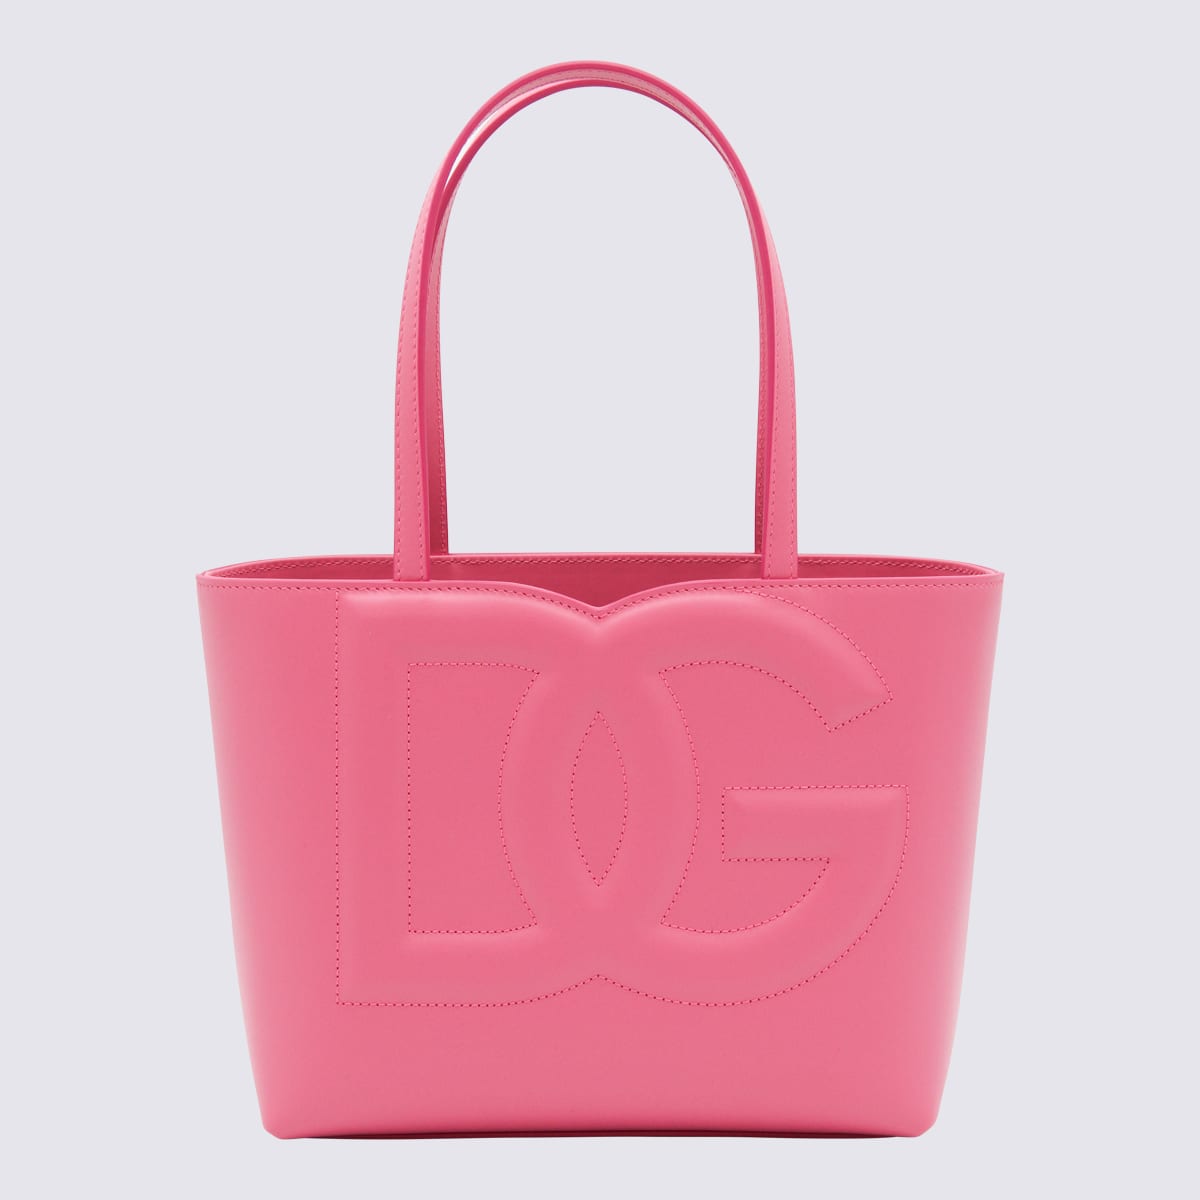 DOLCE & GABBANA PINK LEATHER TOTE BAG